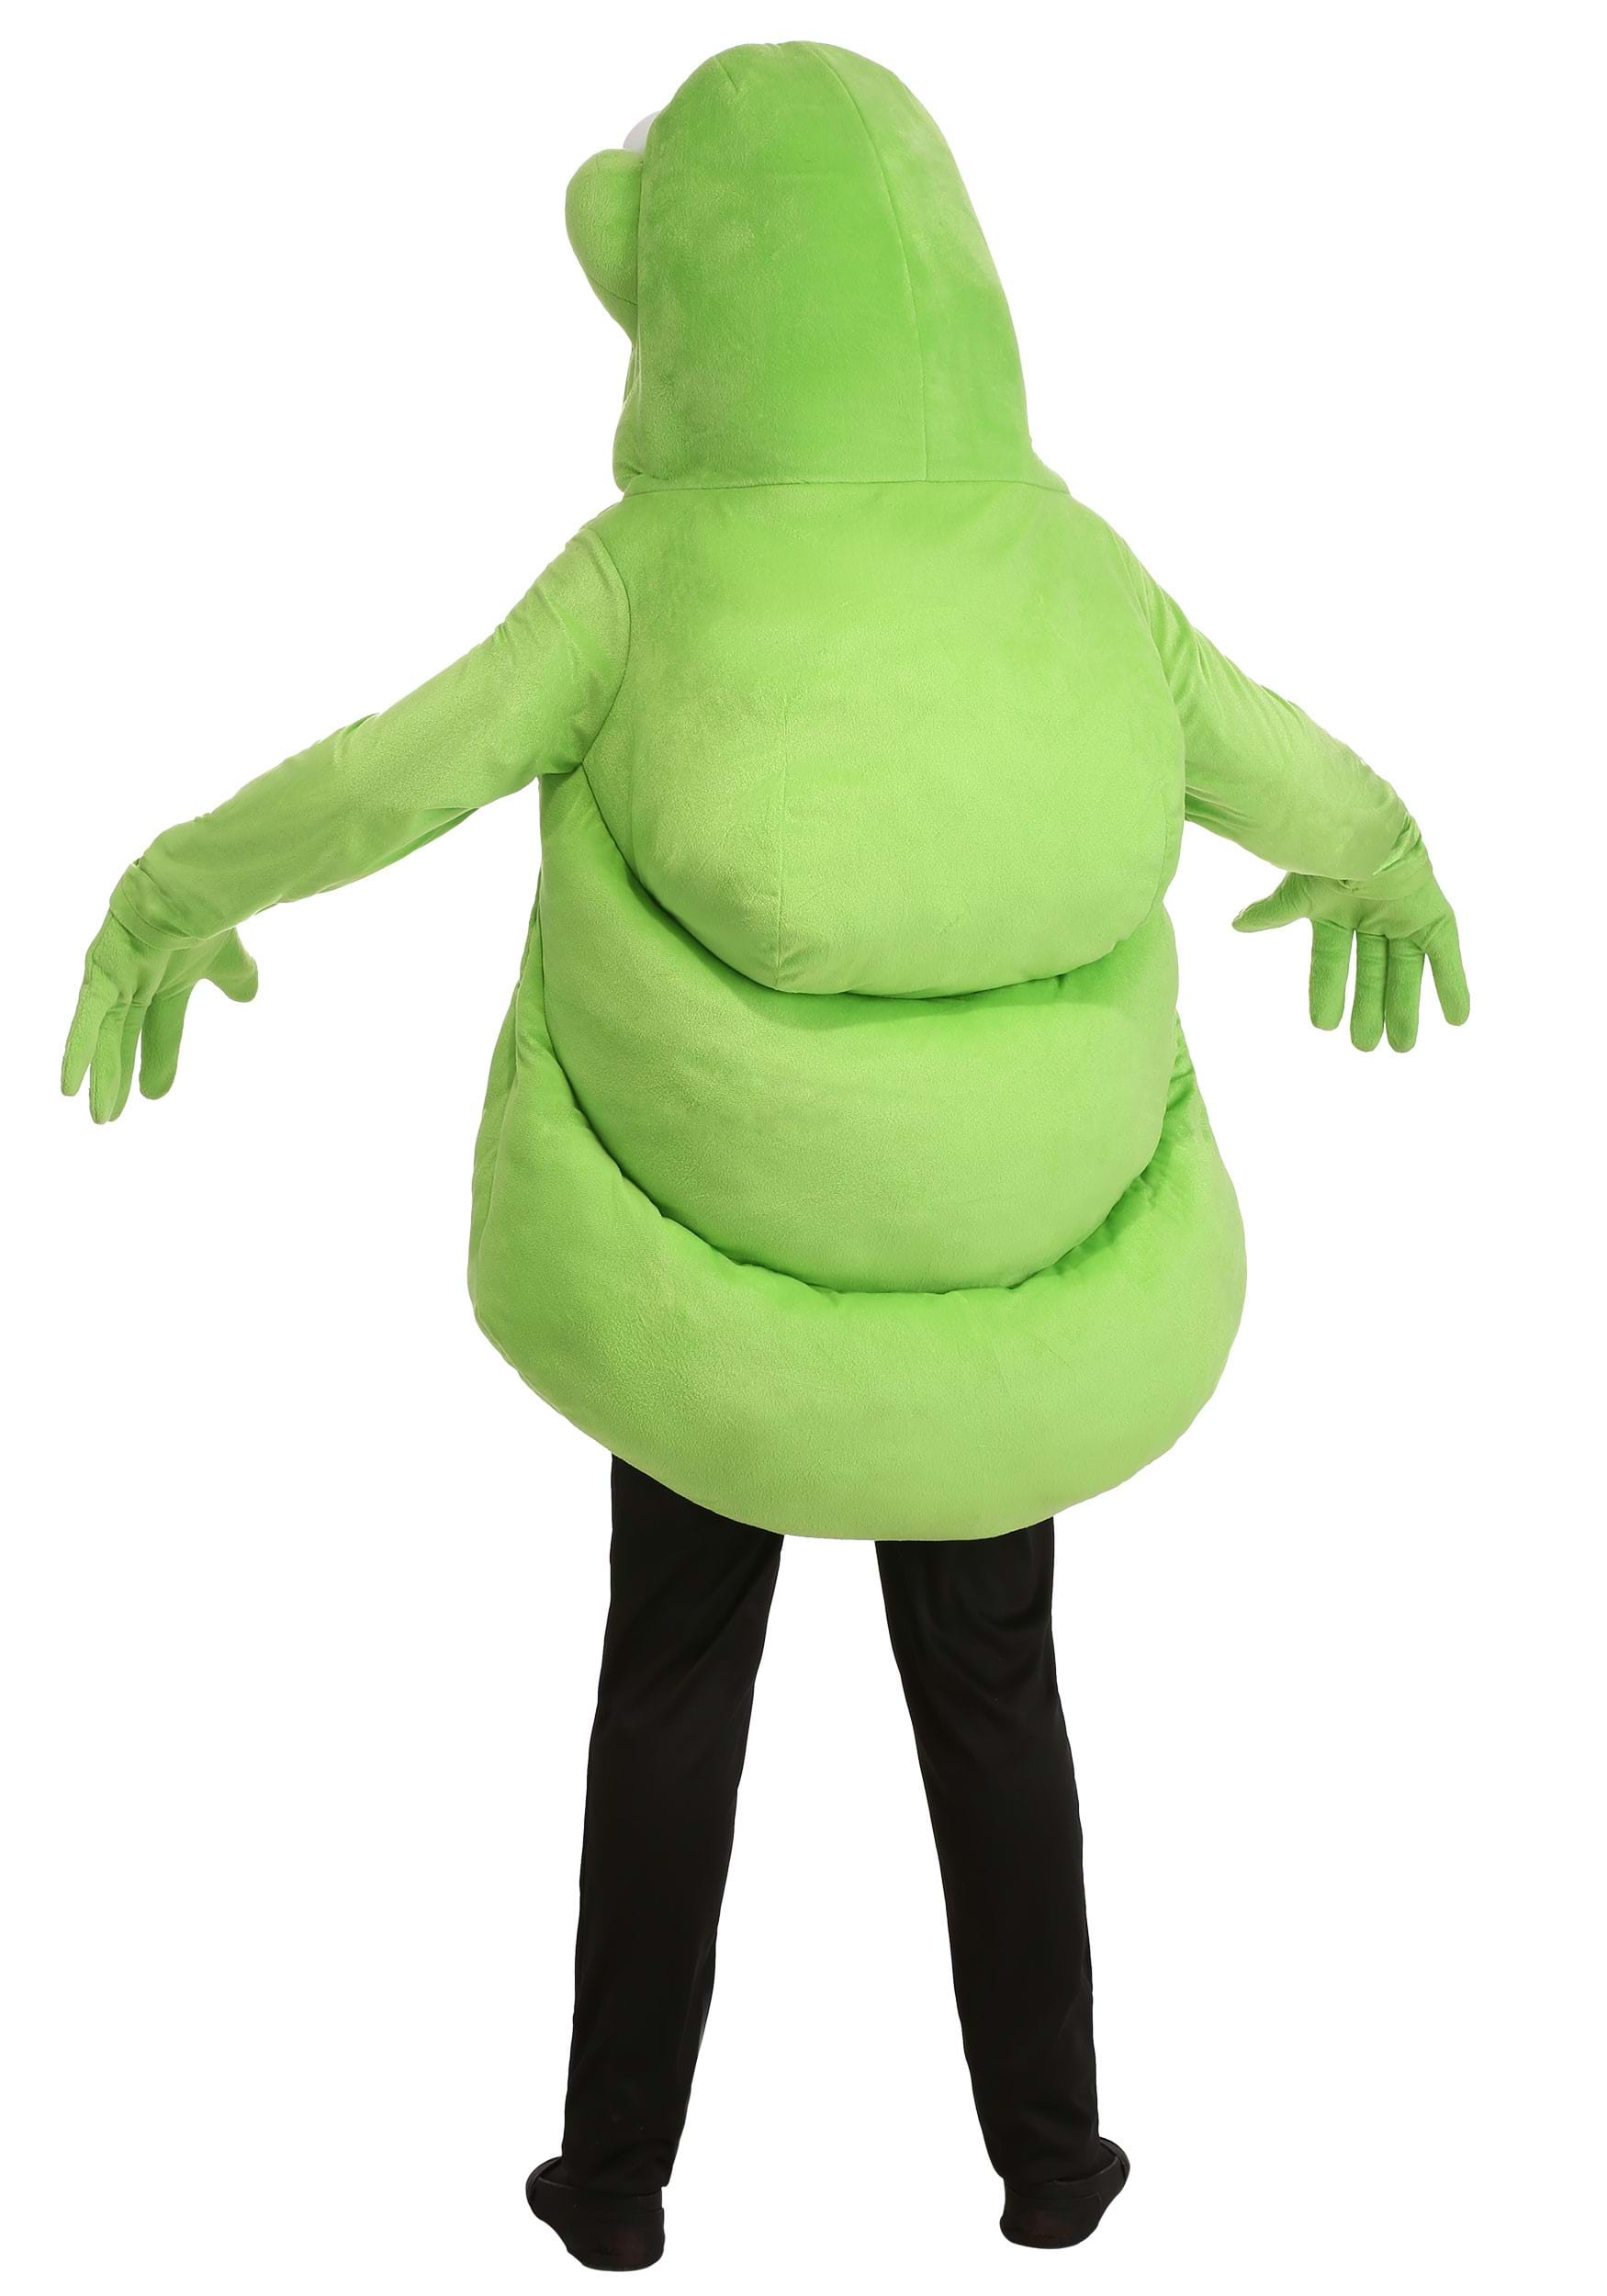 Adult Ghostbusters Slimer Costume , Ghostbuster Costume